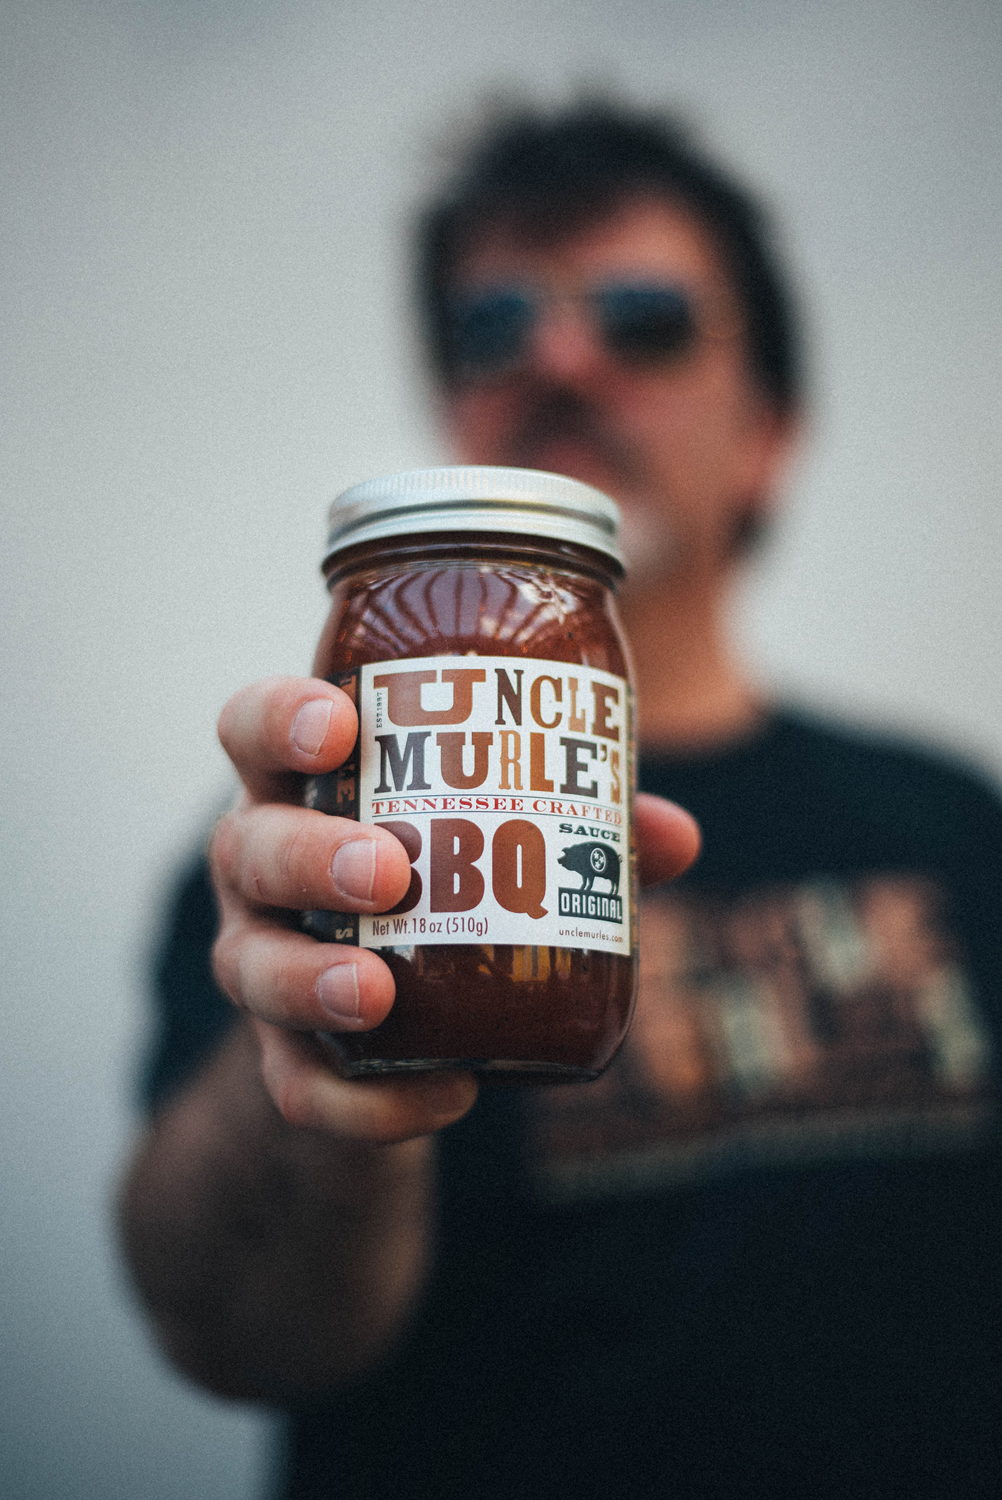  Uncle Murle’s BBQ Sauce packaging  Branding creative and design by Chuck Mitchell  Photograph by Reid Mitchell 